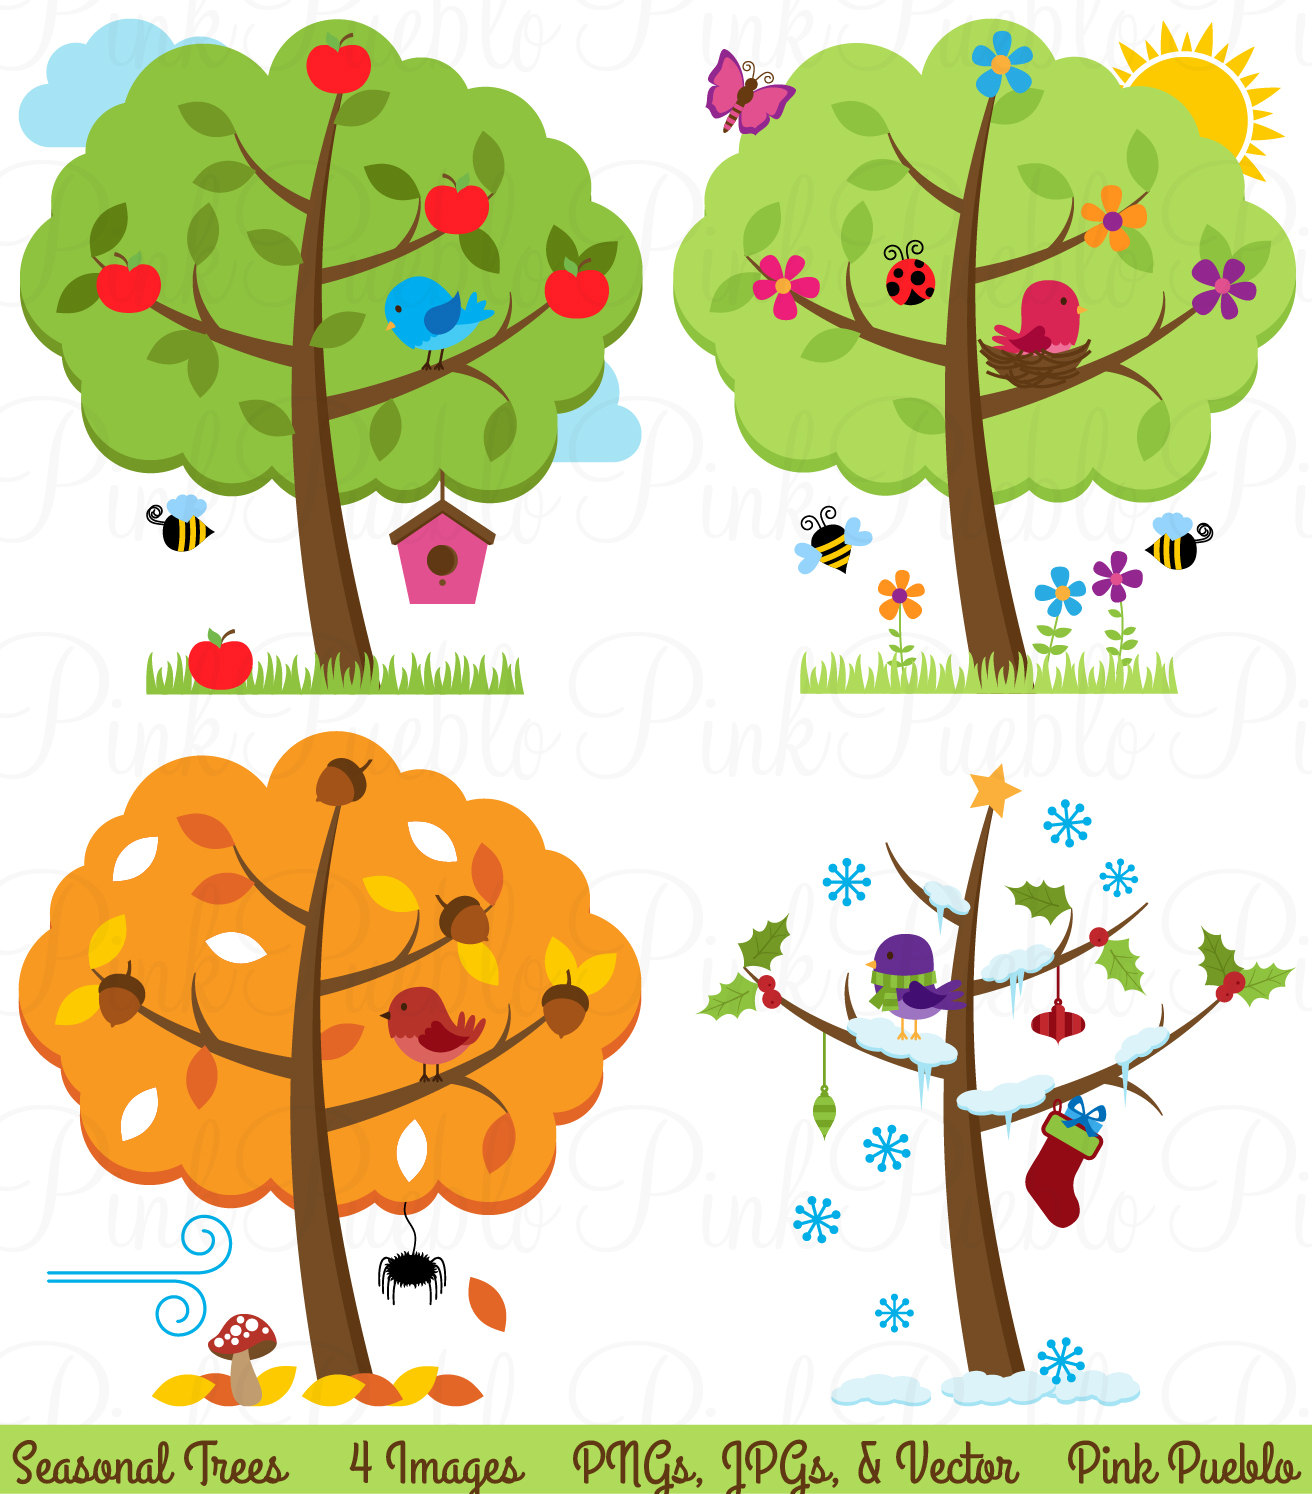 Four Seasons Trees Clipart Clip Art, Seasonal Trees and Birds Clipart Clip Art Vectors - Commercial and Personal Use